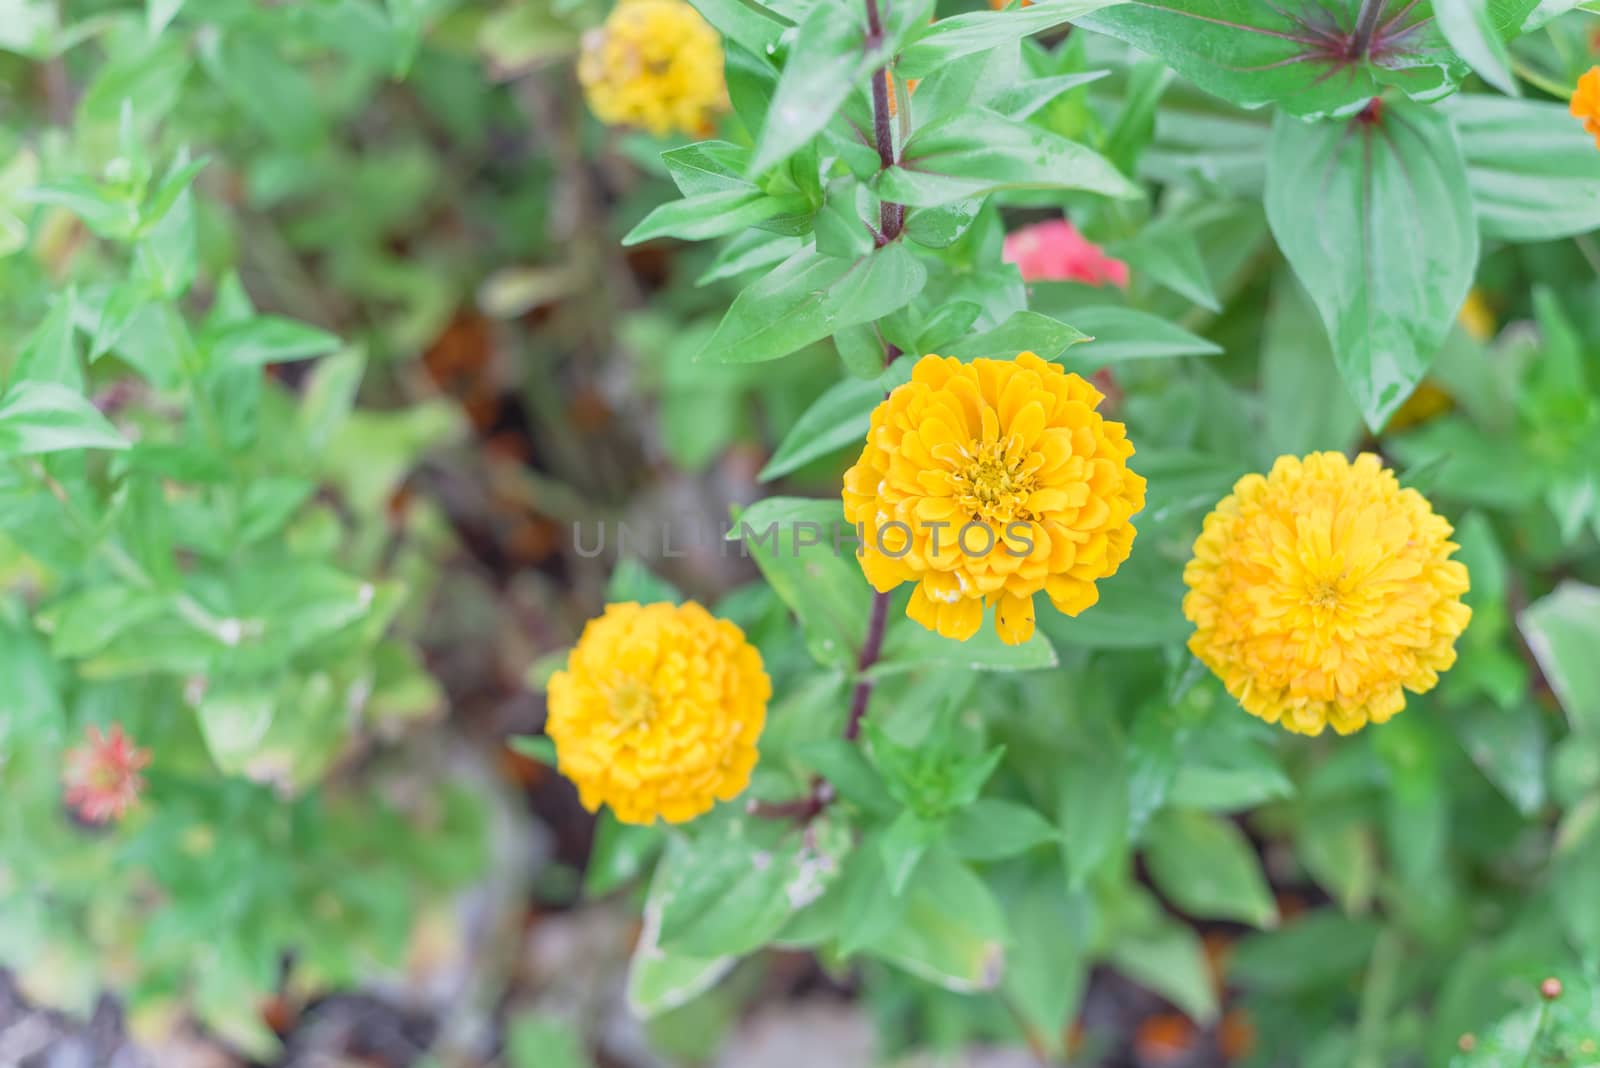 Blossom yellow zinnia bush at flower bed in community allotment near Dallas, Texas, USA by trongnguyen